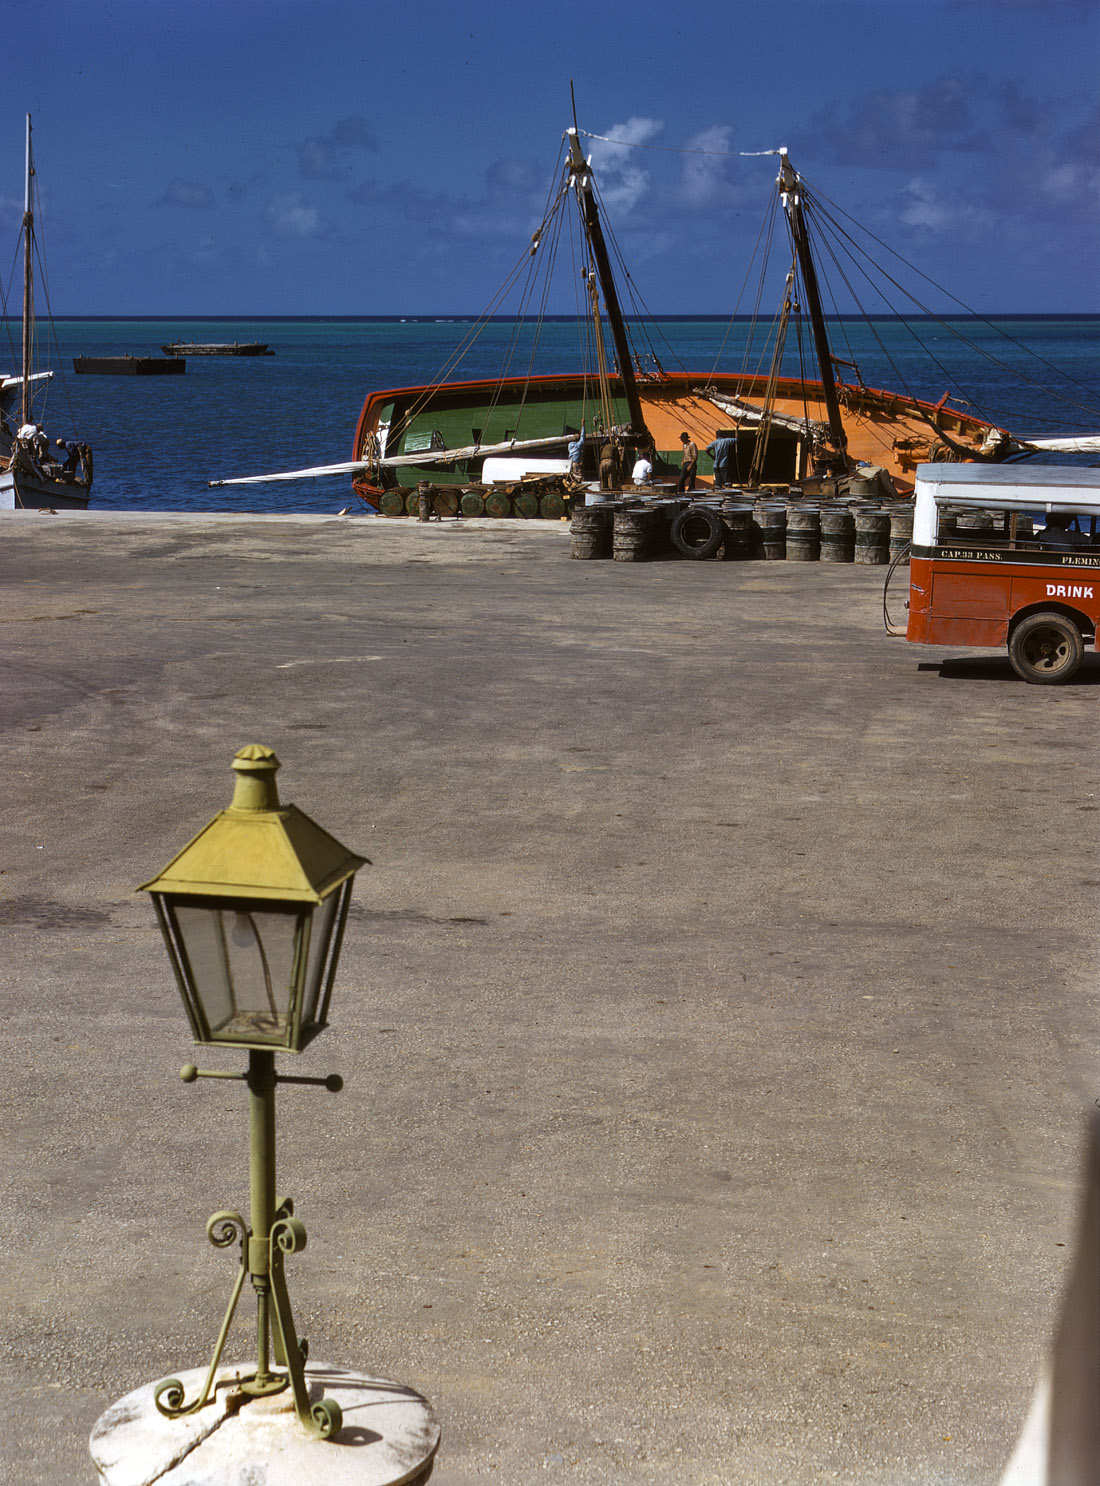 December 1941. Along the waterfront of Christiansted, Saint Croix, in the Virgin Islands. View full size. 4x5 Kodachrome transparency by Jack Delano.